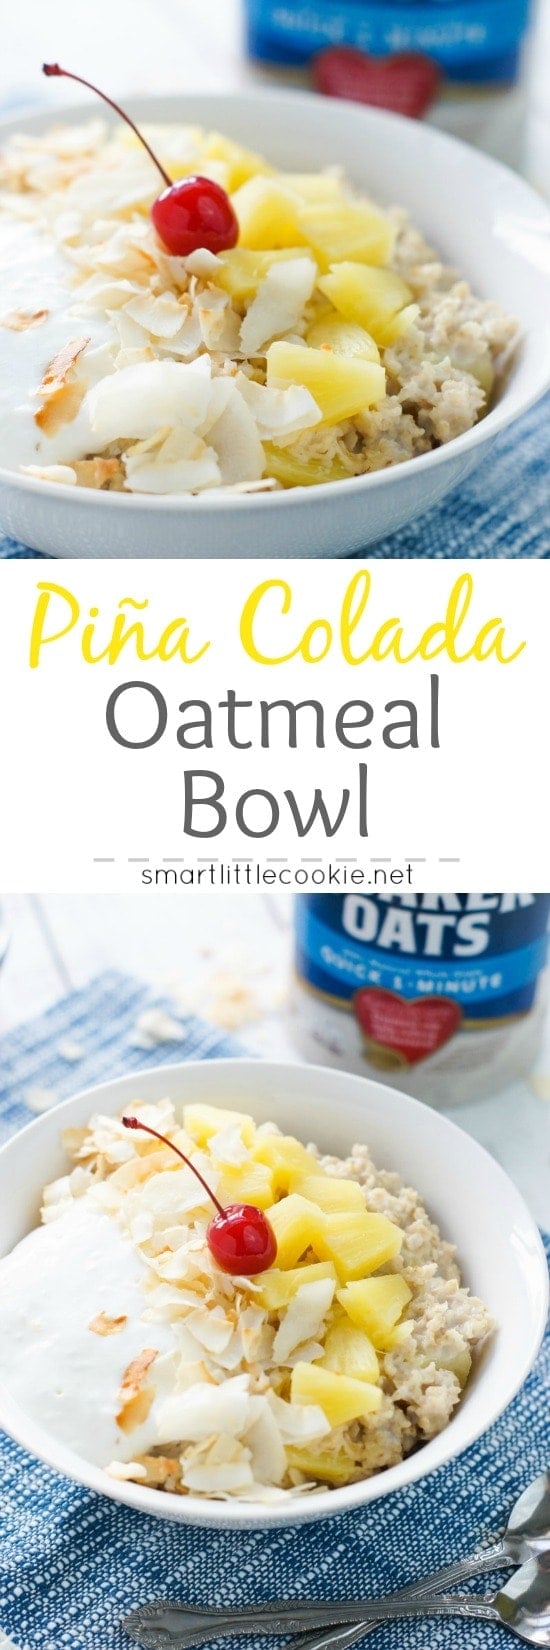 Pinterest image. Pina colada oatmeal bowl with text overlay.